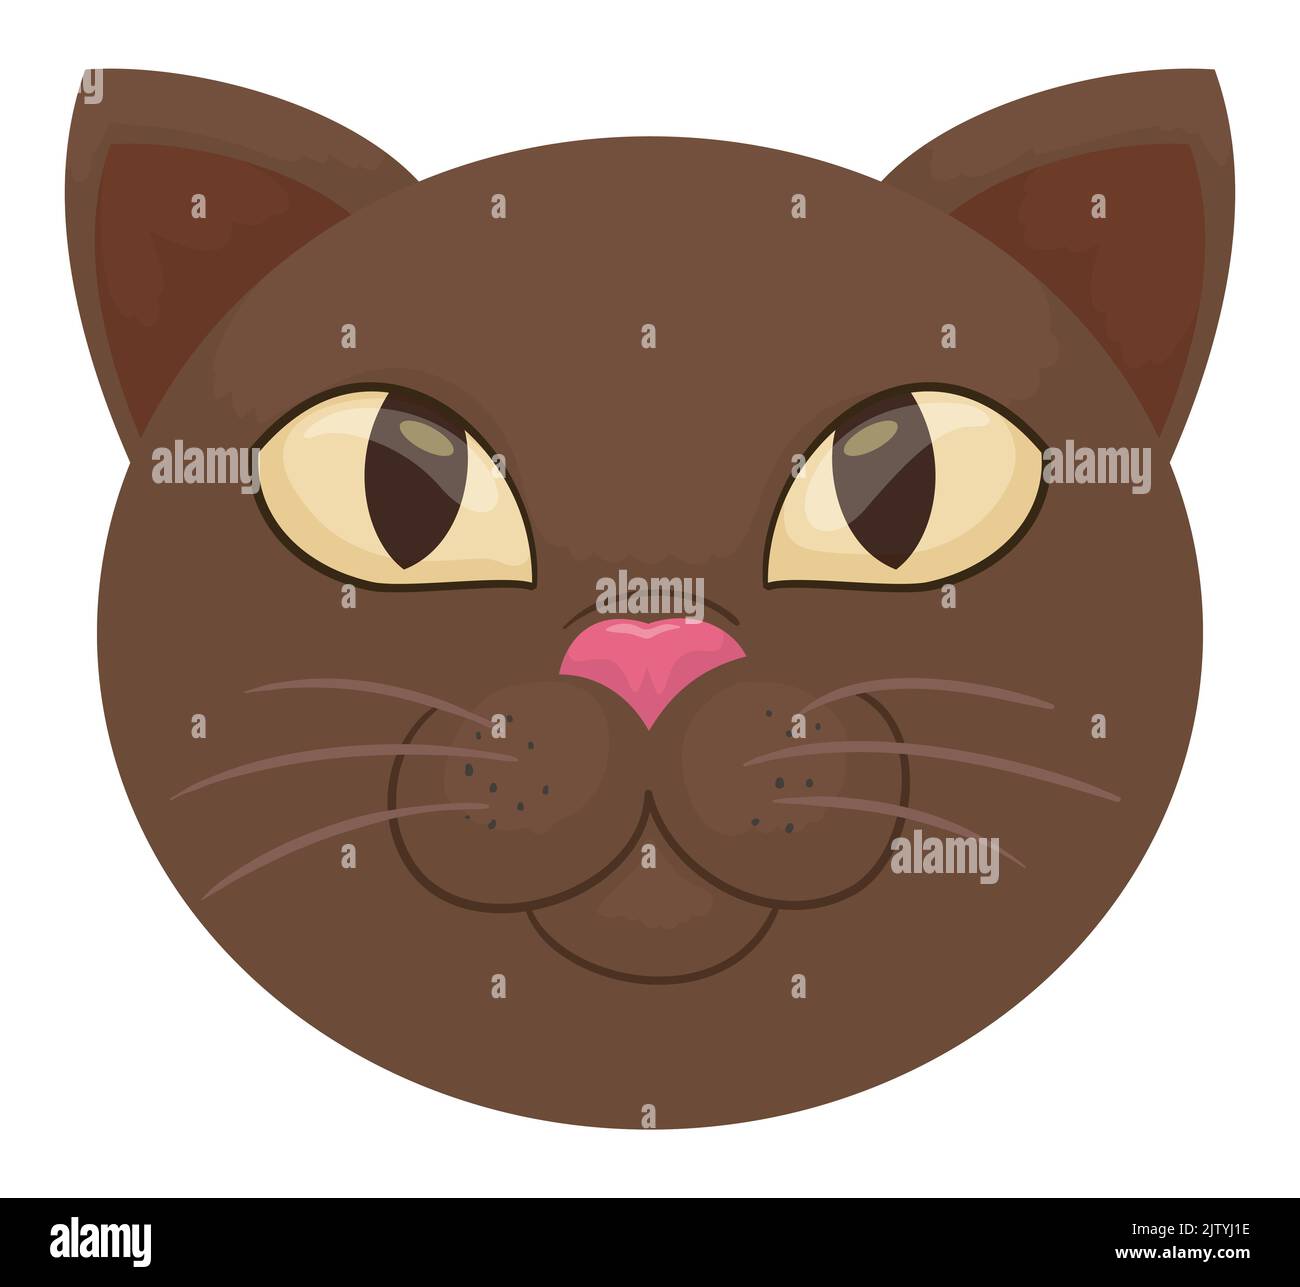 Isolated cat head with brown fur, yellow eyes and looking at the top, over white background. Stock Vector